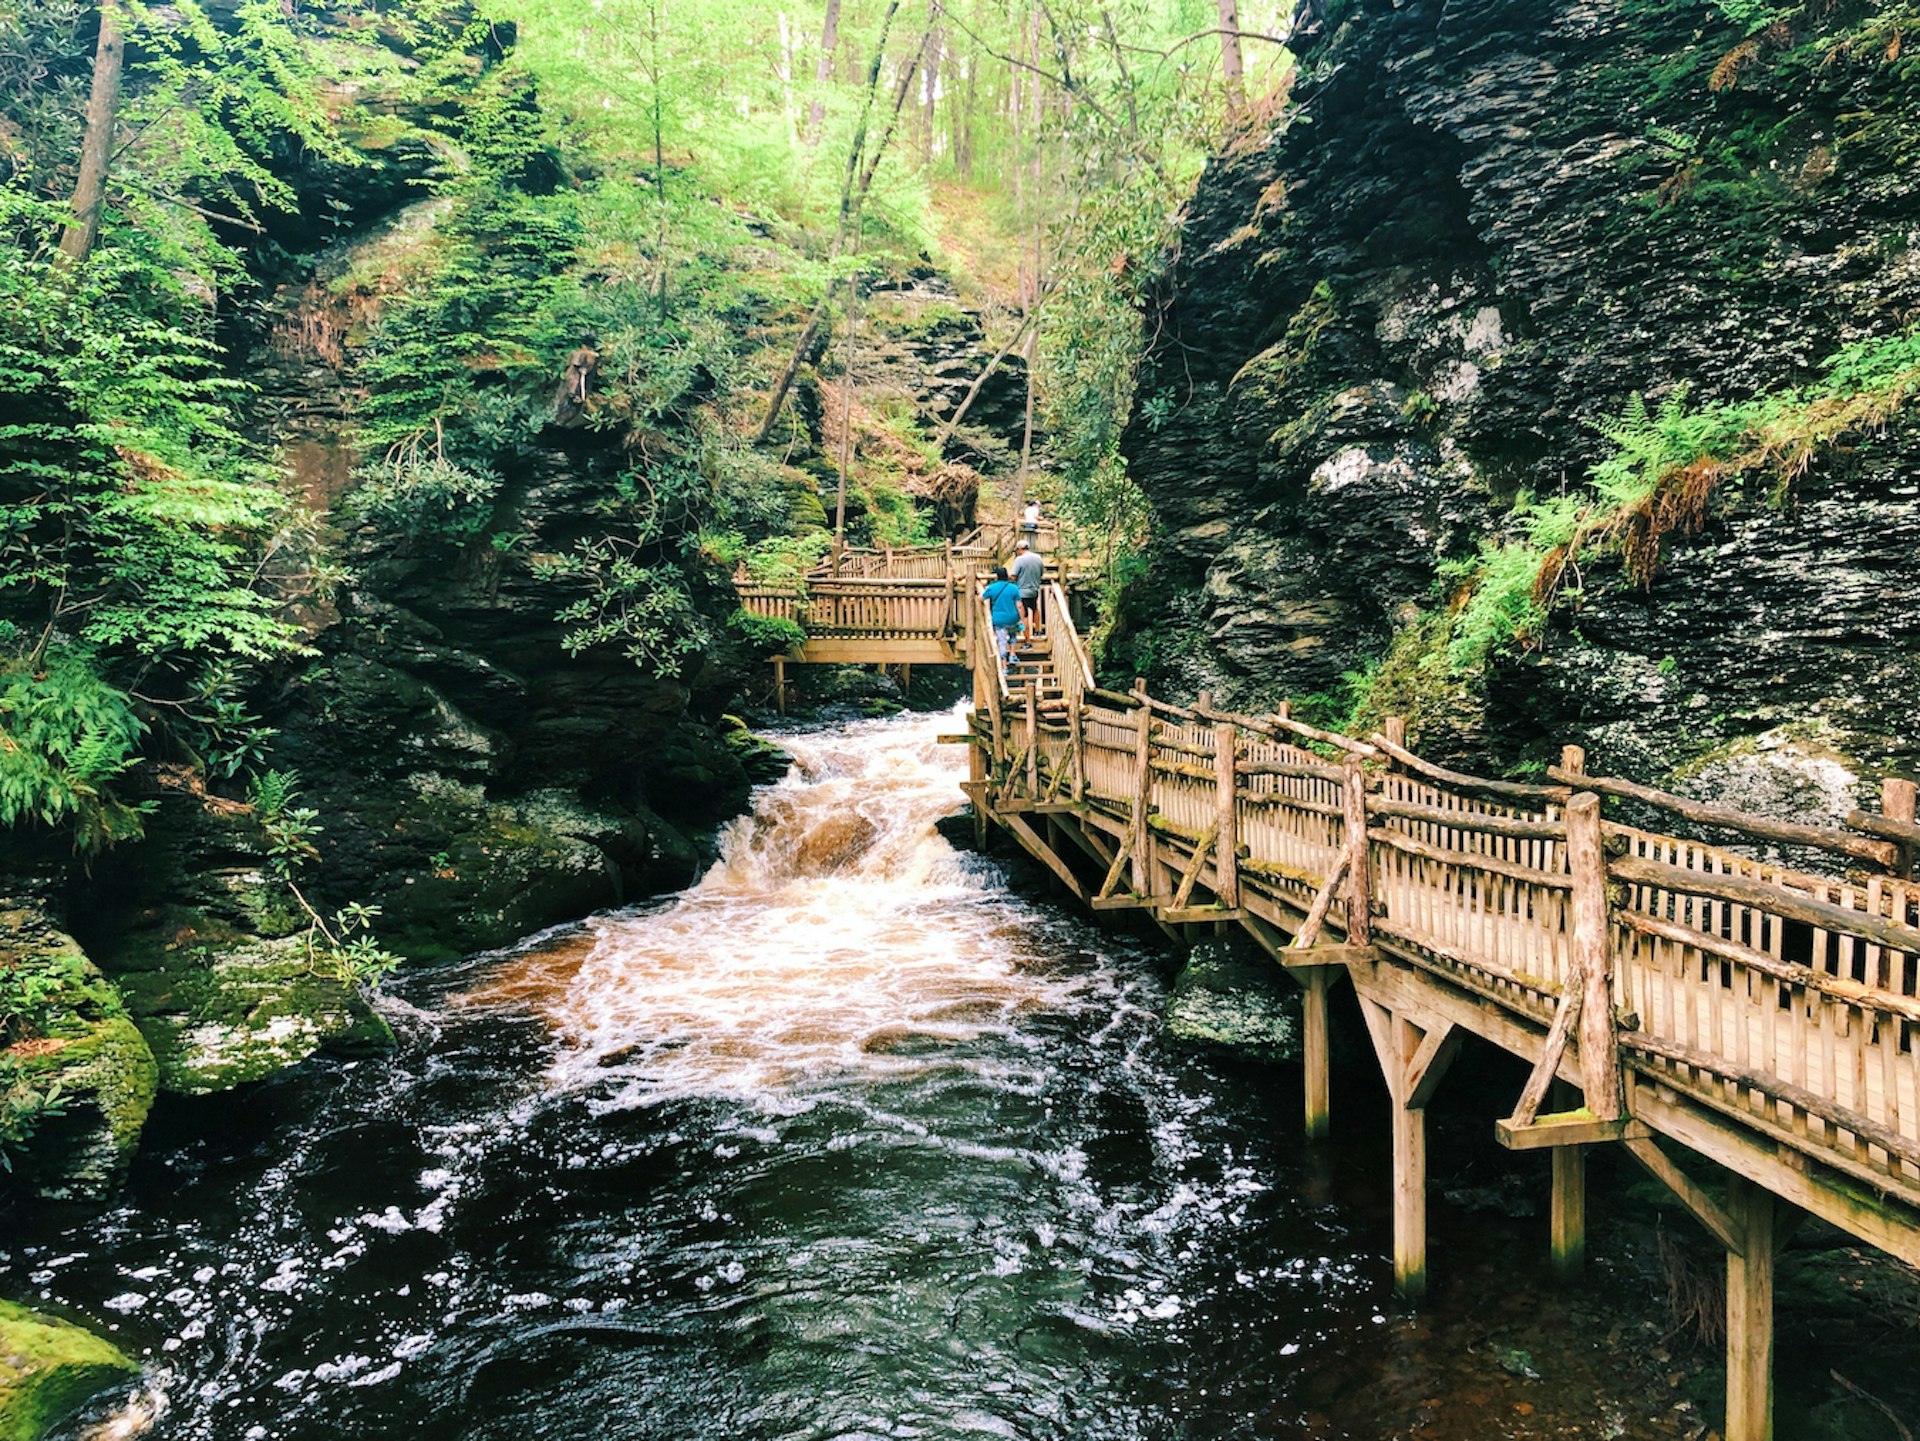 The boardwalk and stairs through Bushkill Falls canyon